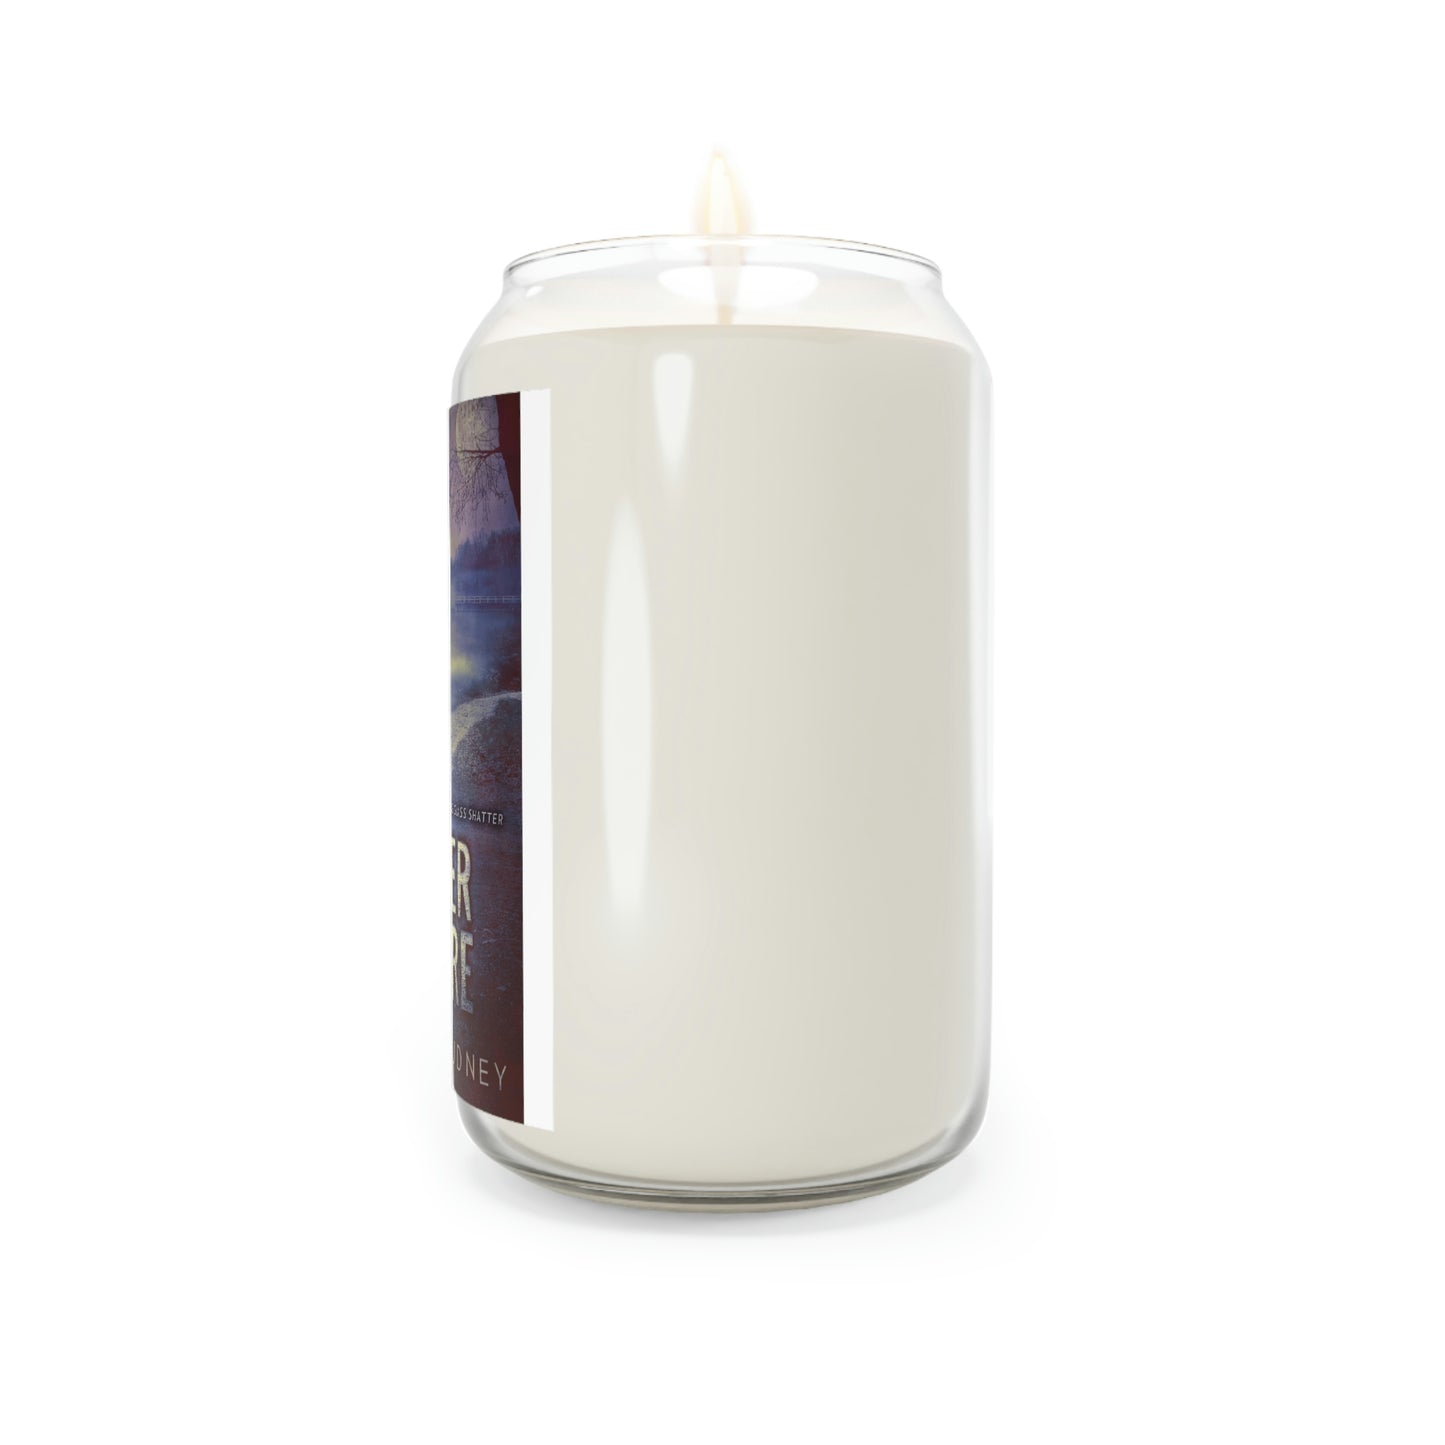 Father Figure - Scented Candle